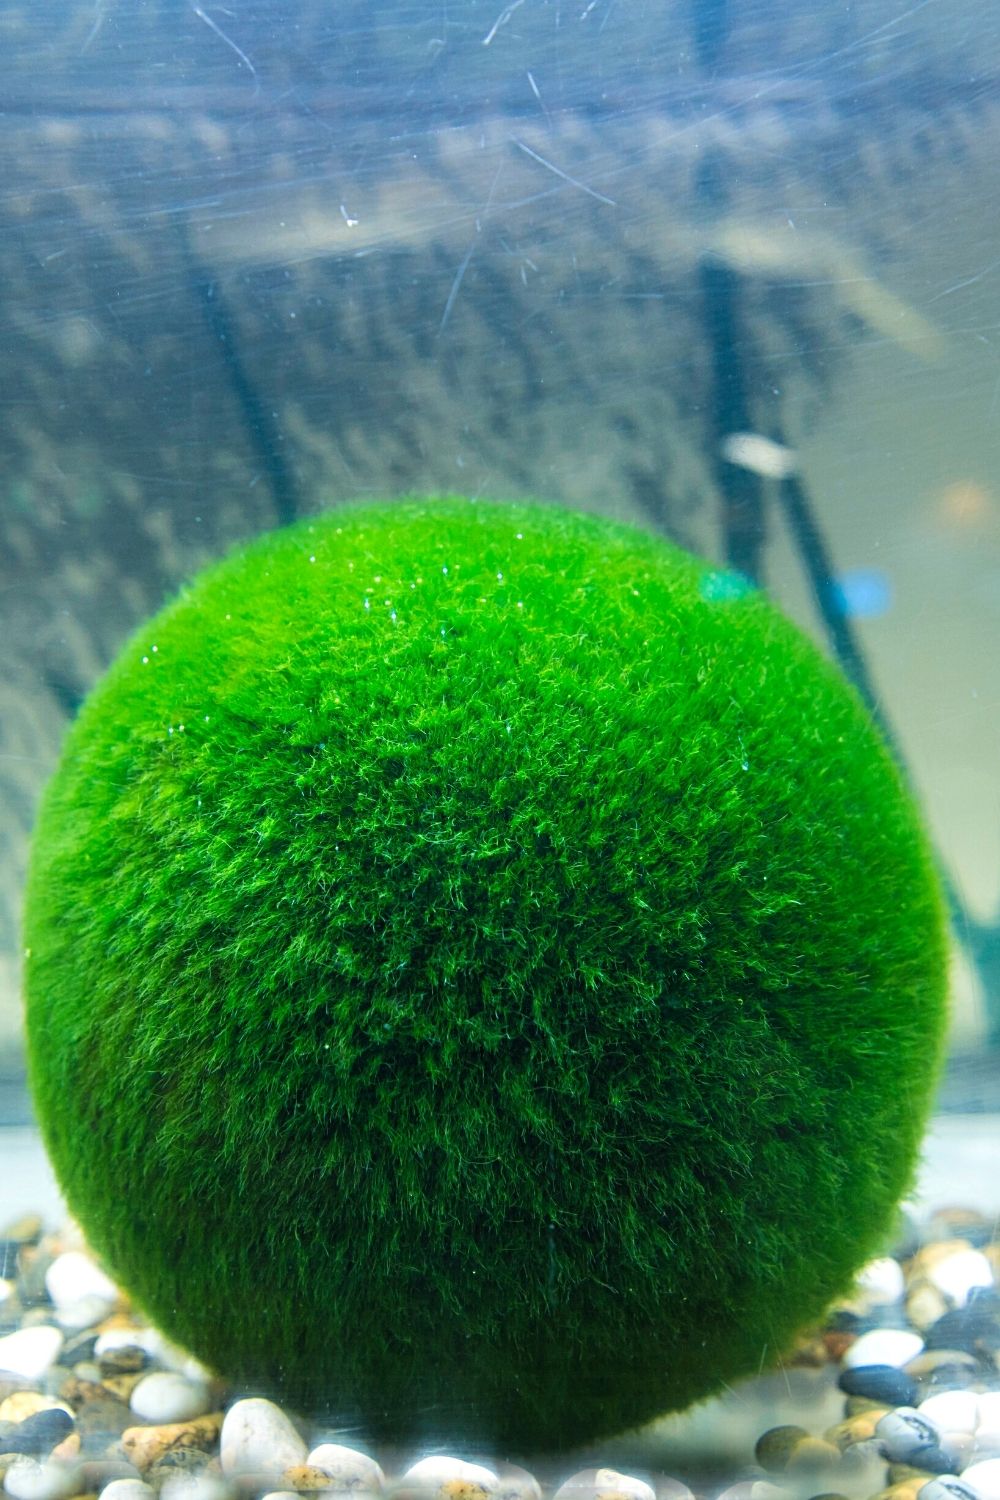 If you're looking for a low-maintenance aquatic plant for your betta fish, Marimo Moss Balls is your best bet